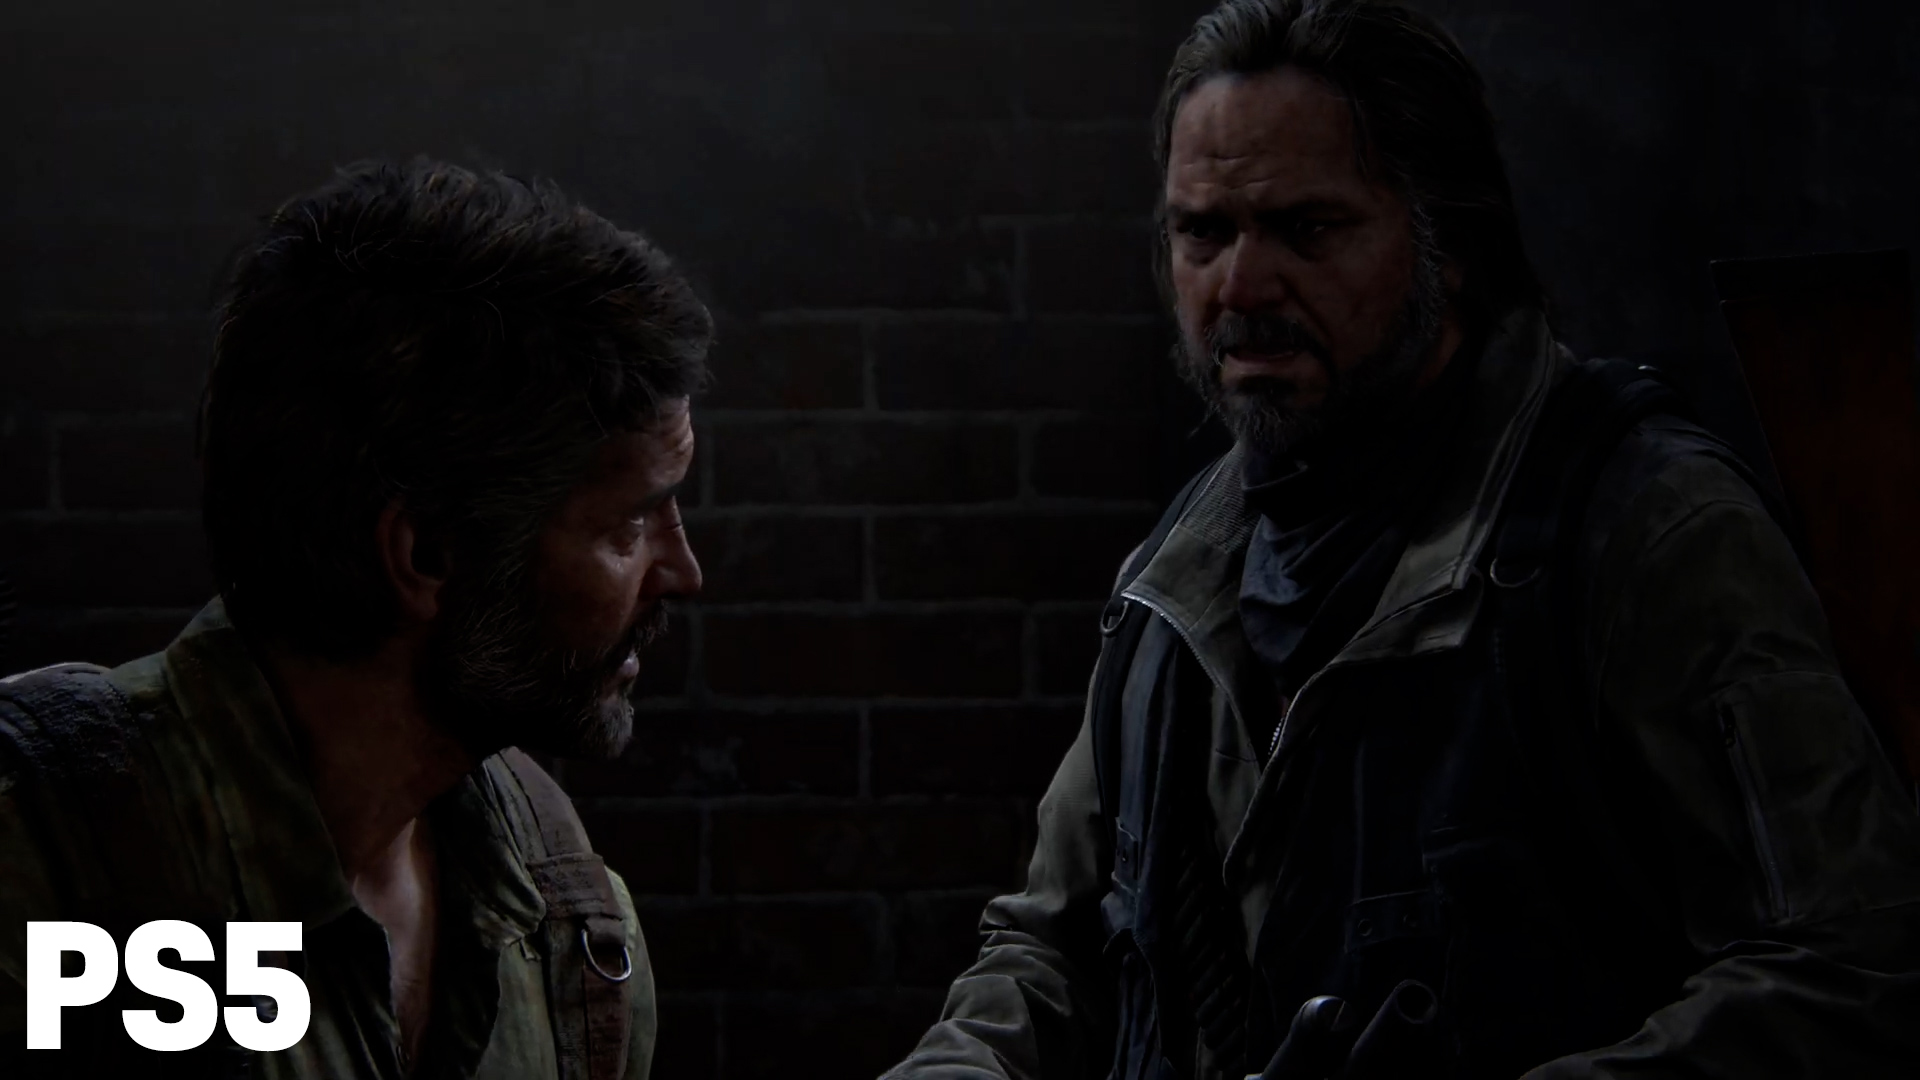 The Last Of Us Remake Is Officially Coming To PC